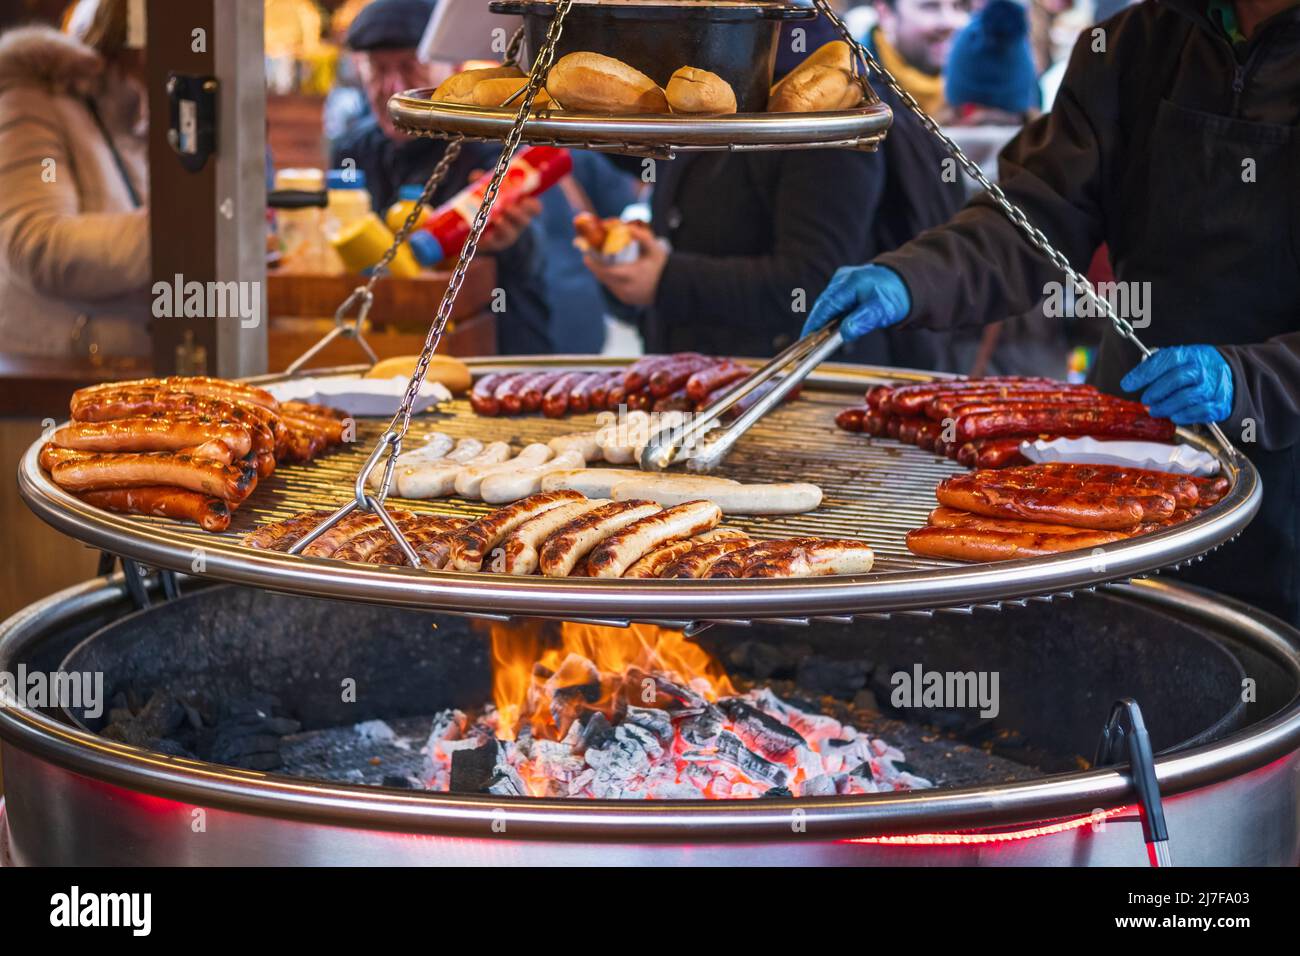 Grilling sausages on barbecue grill at a food stall of Christmas market in Hyde Park Winter Wonderland in London Stock Photo